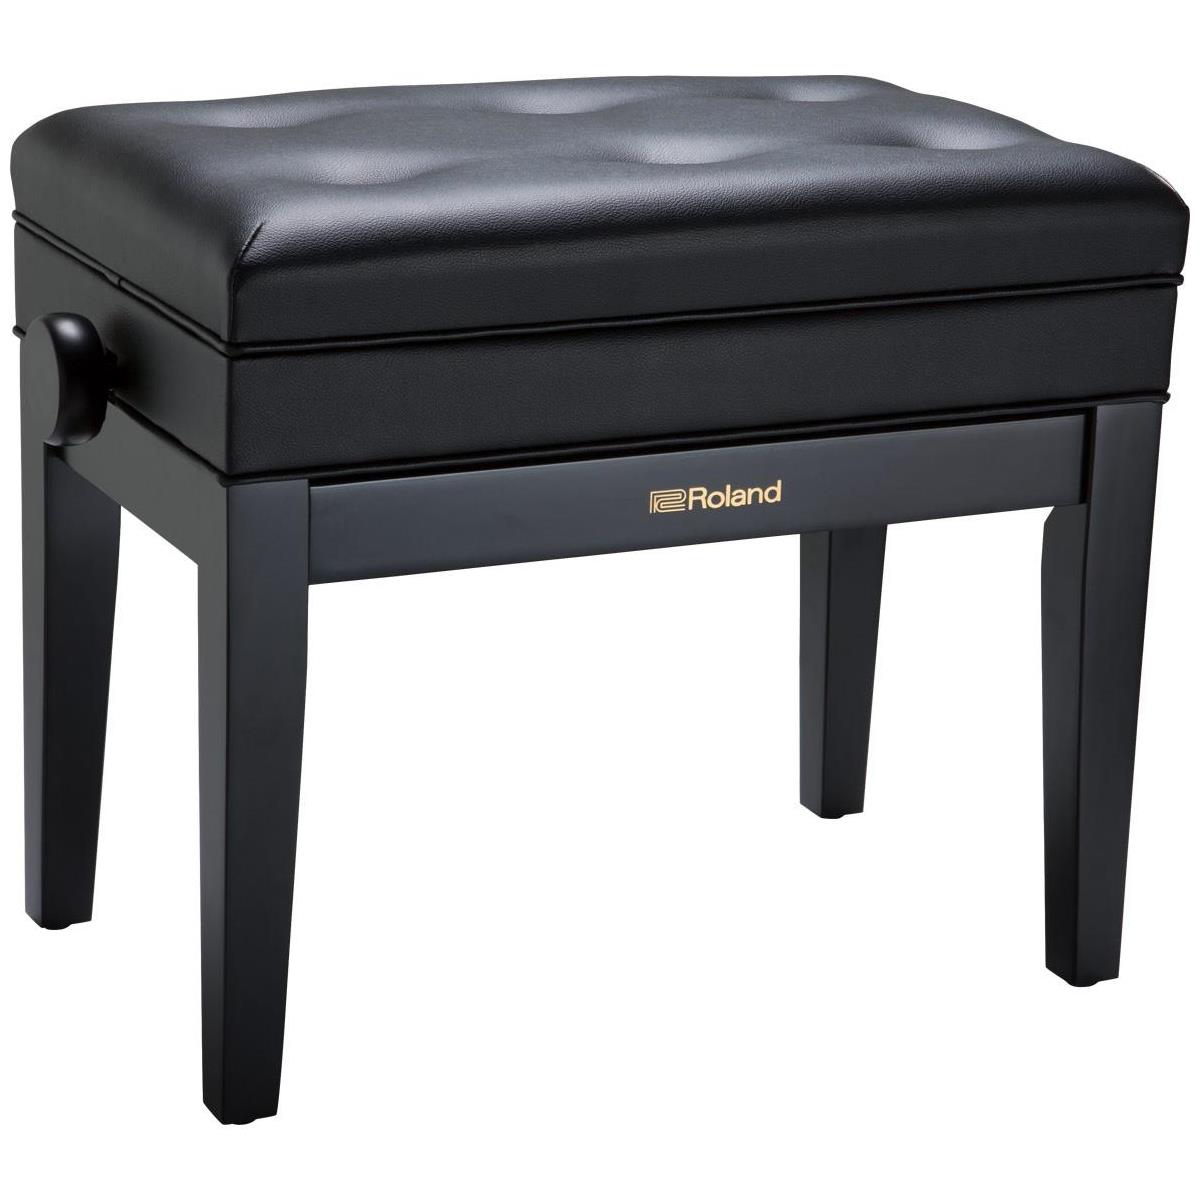 Image of Roland RPB-400 Piano Bench with Vinyl Seat &amp; Storage Compartment